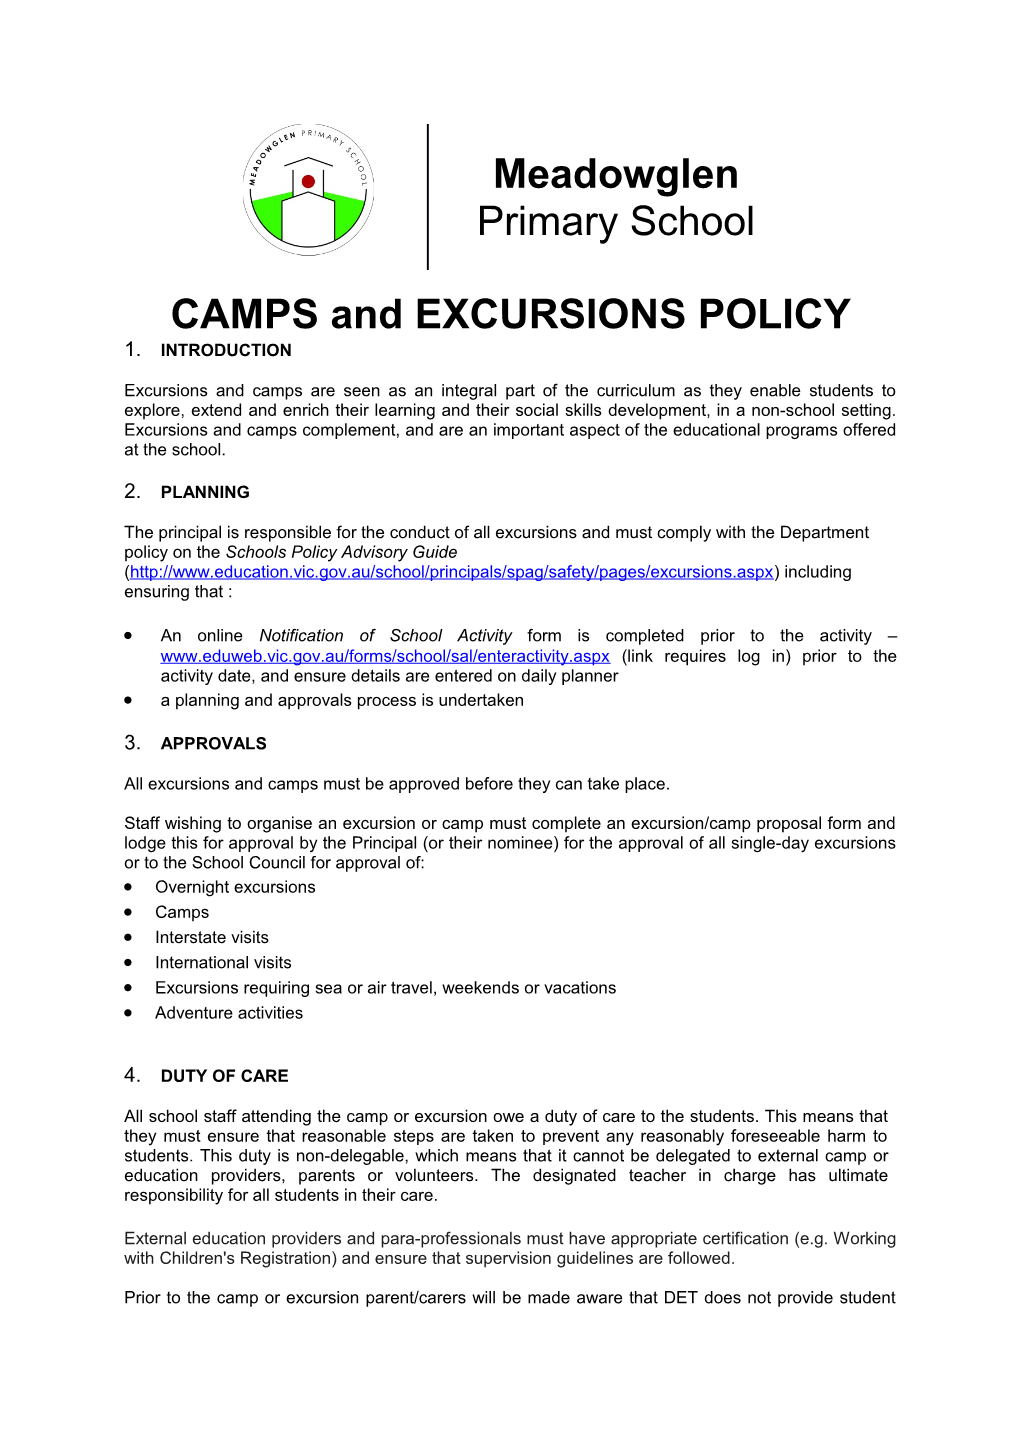 CAMPS and EXCURSIONS POLICY